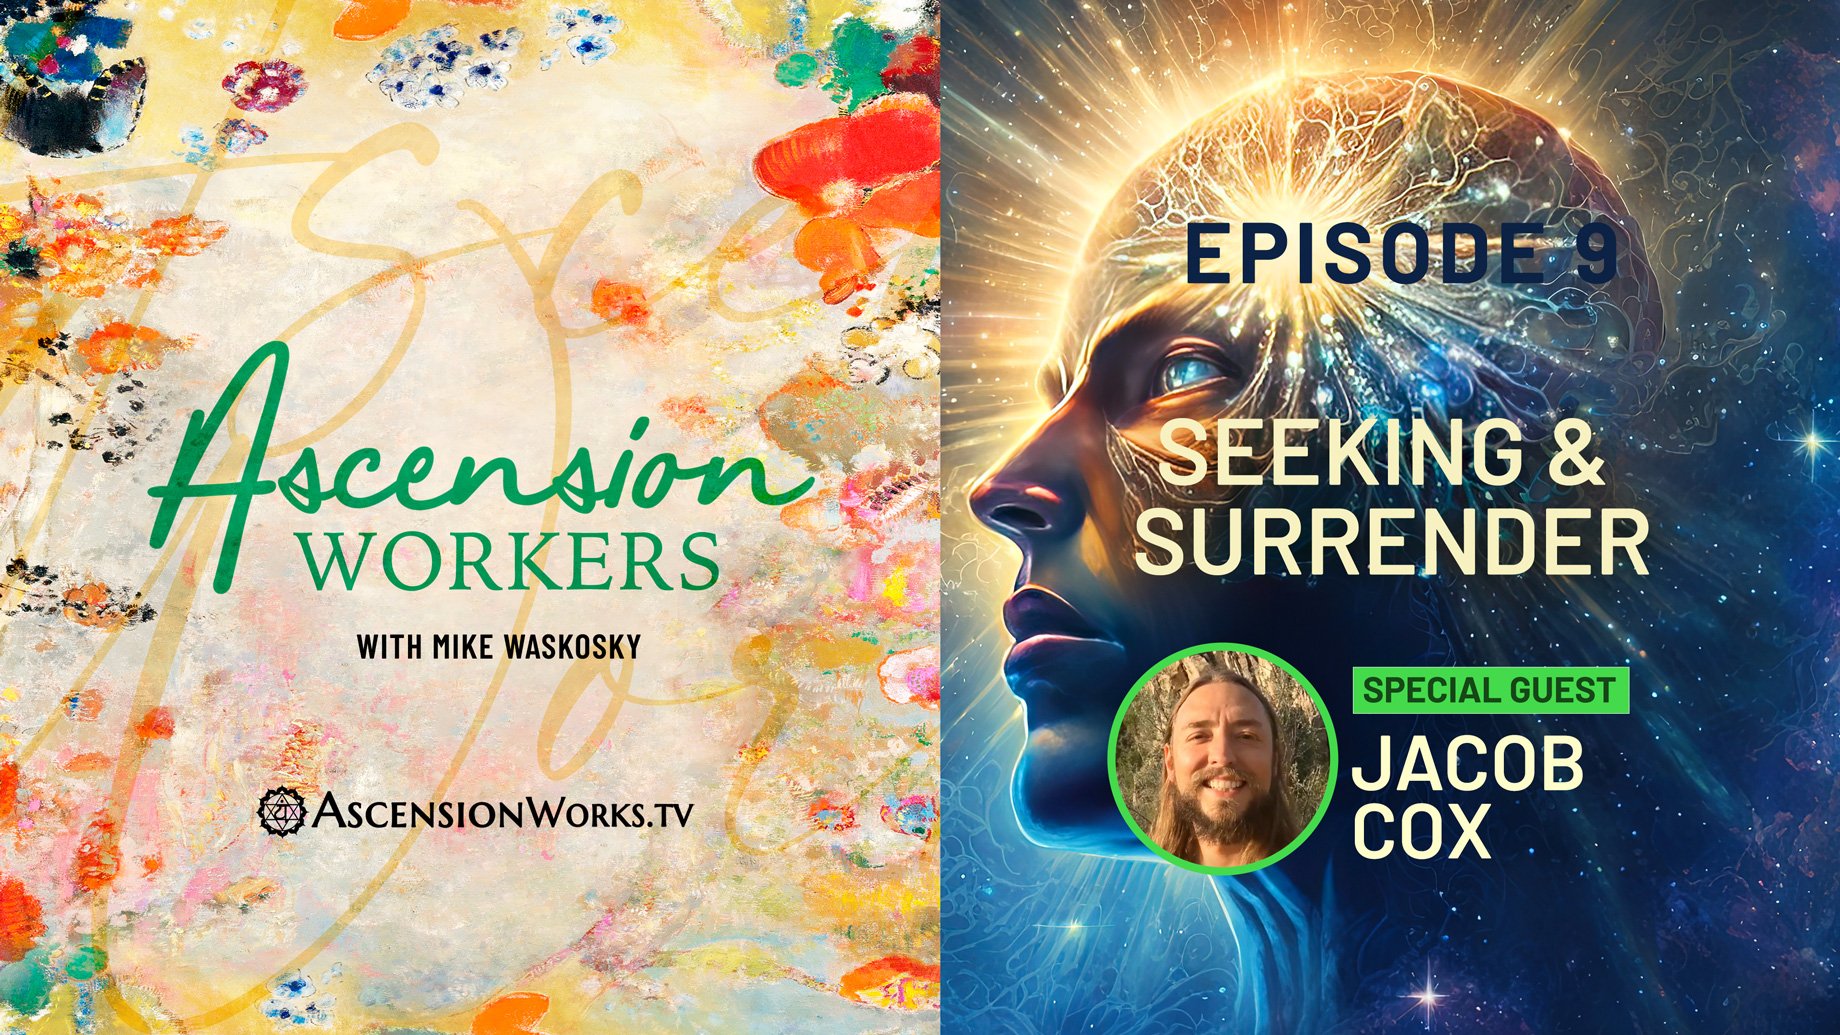 Episode 9 Ascension Workers Live with Special Guest Jacob Cox